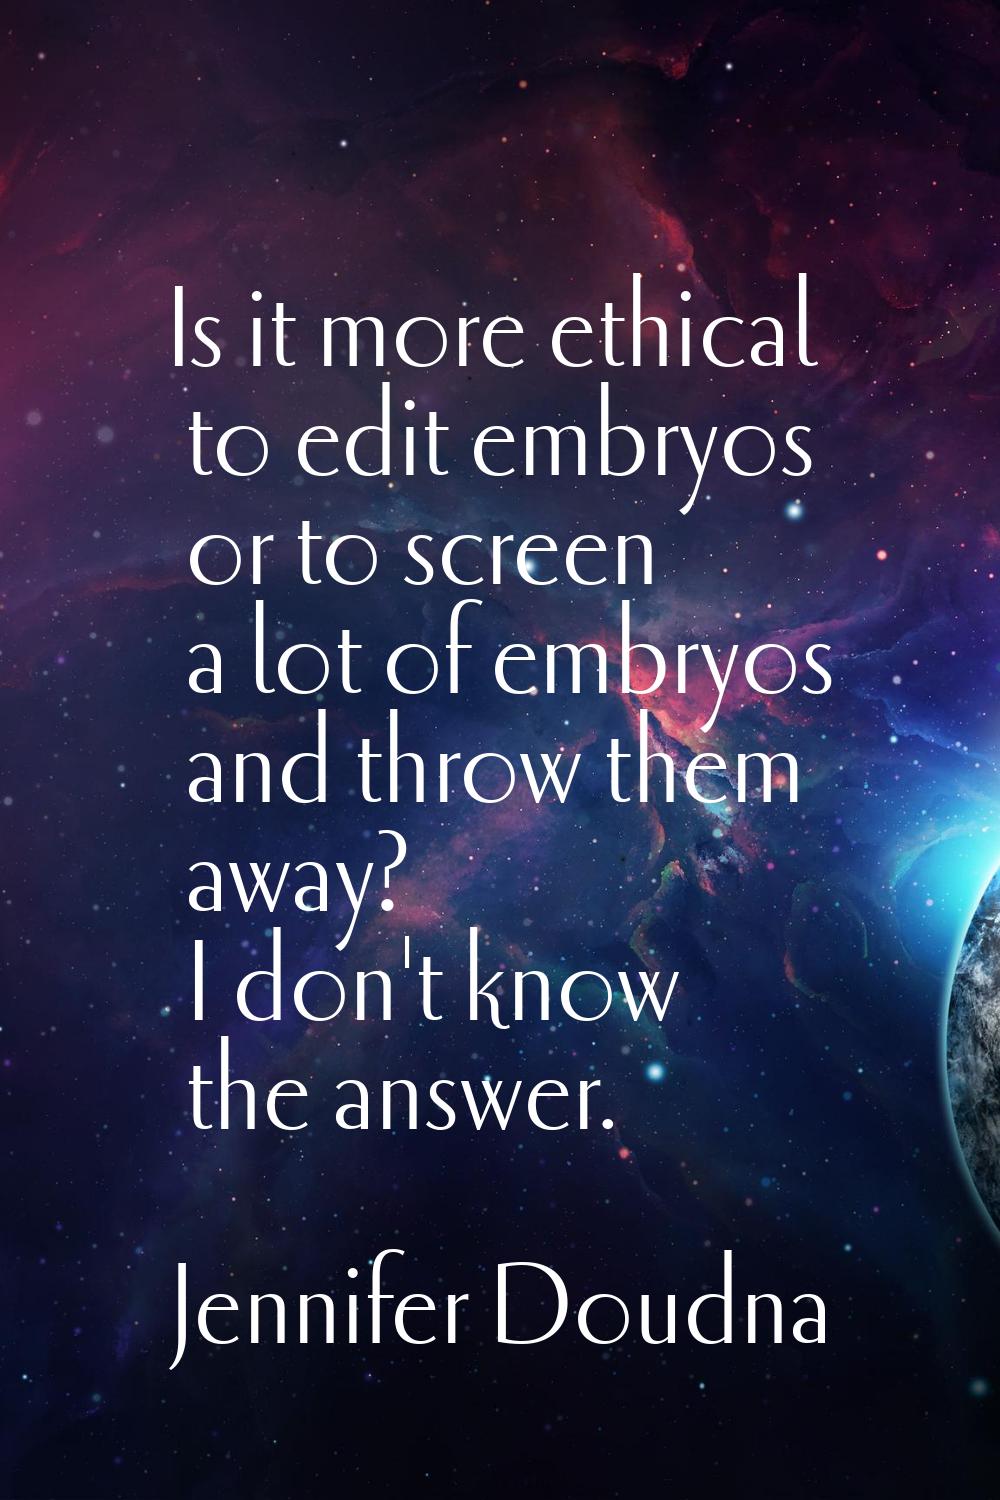 Is it more ethical to edit embryos or to screen a lot of embryos and throw them away? I don't know 